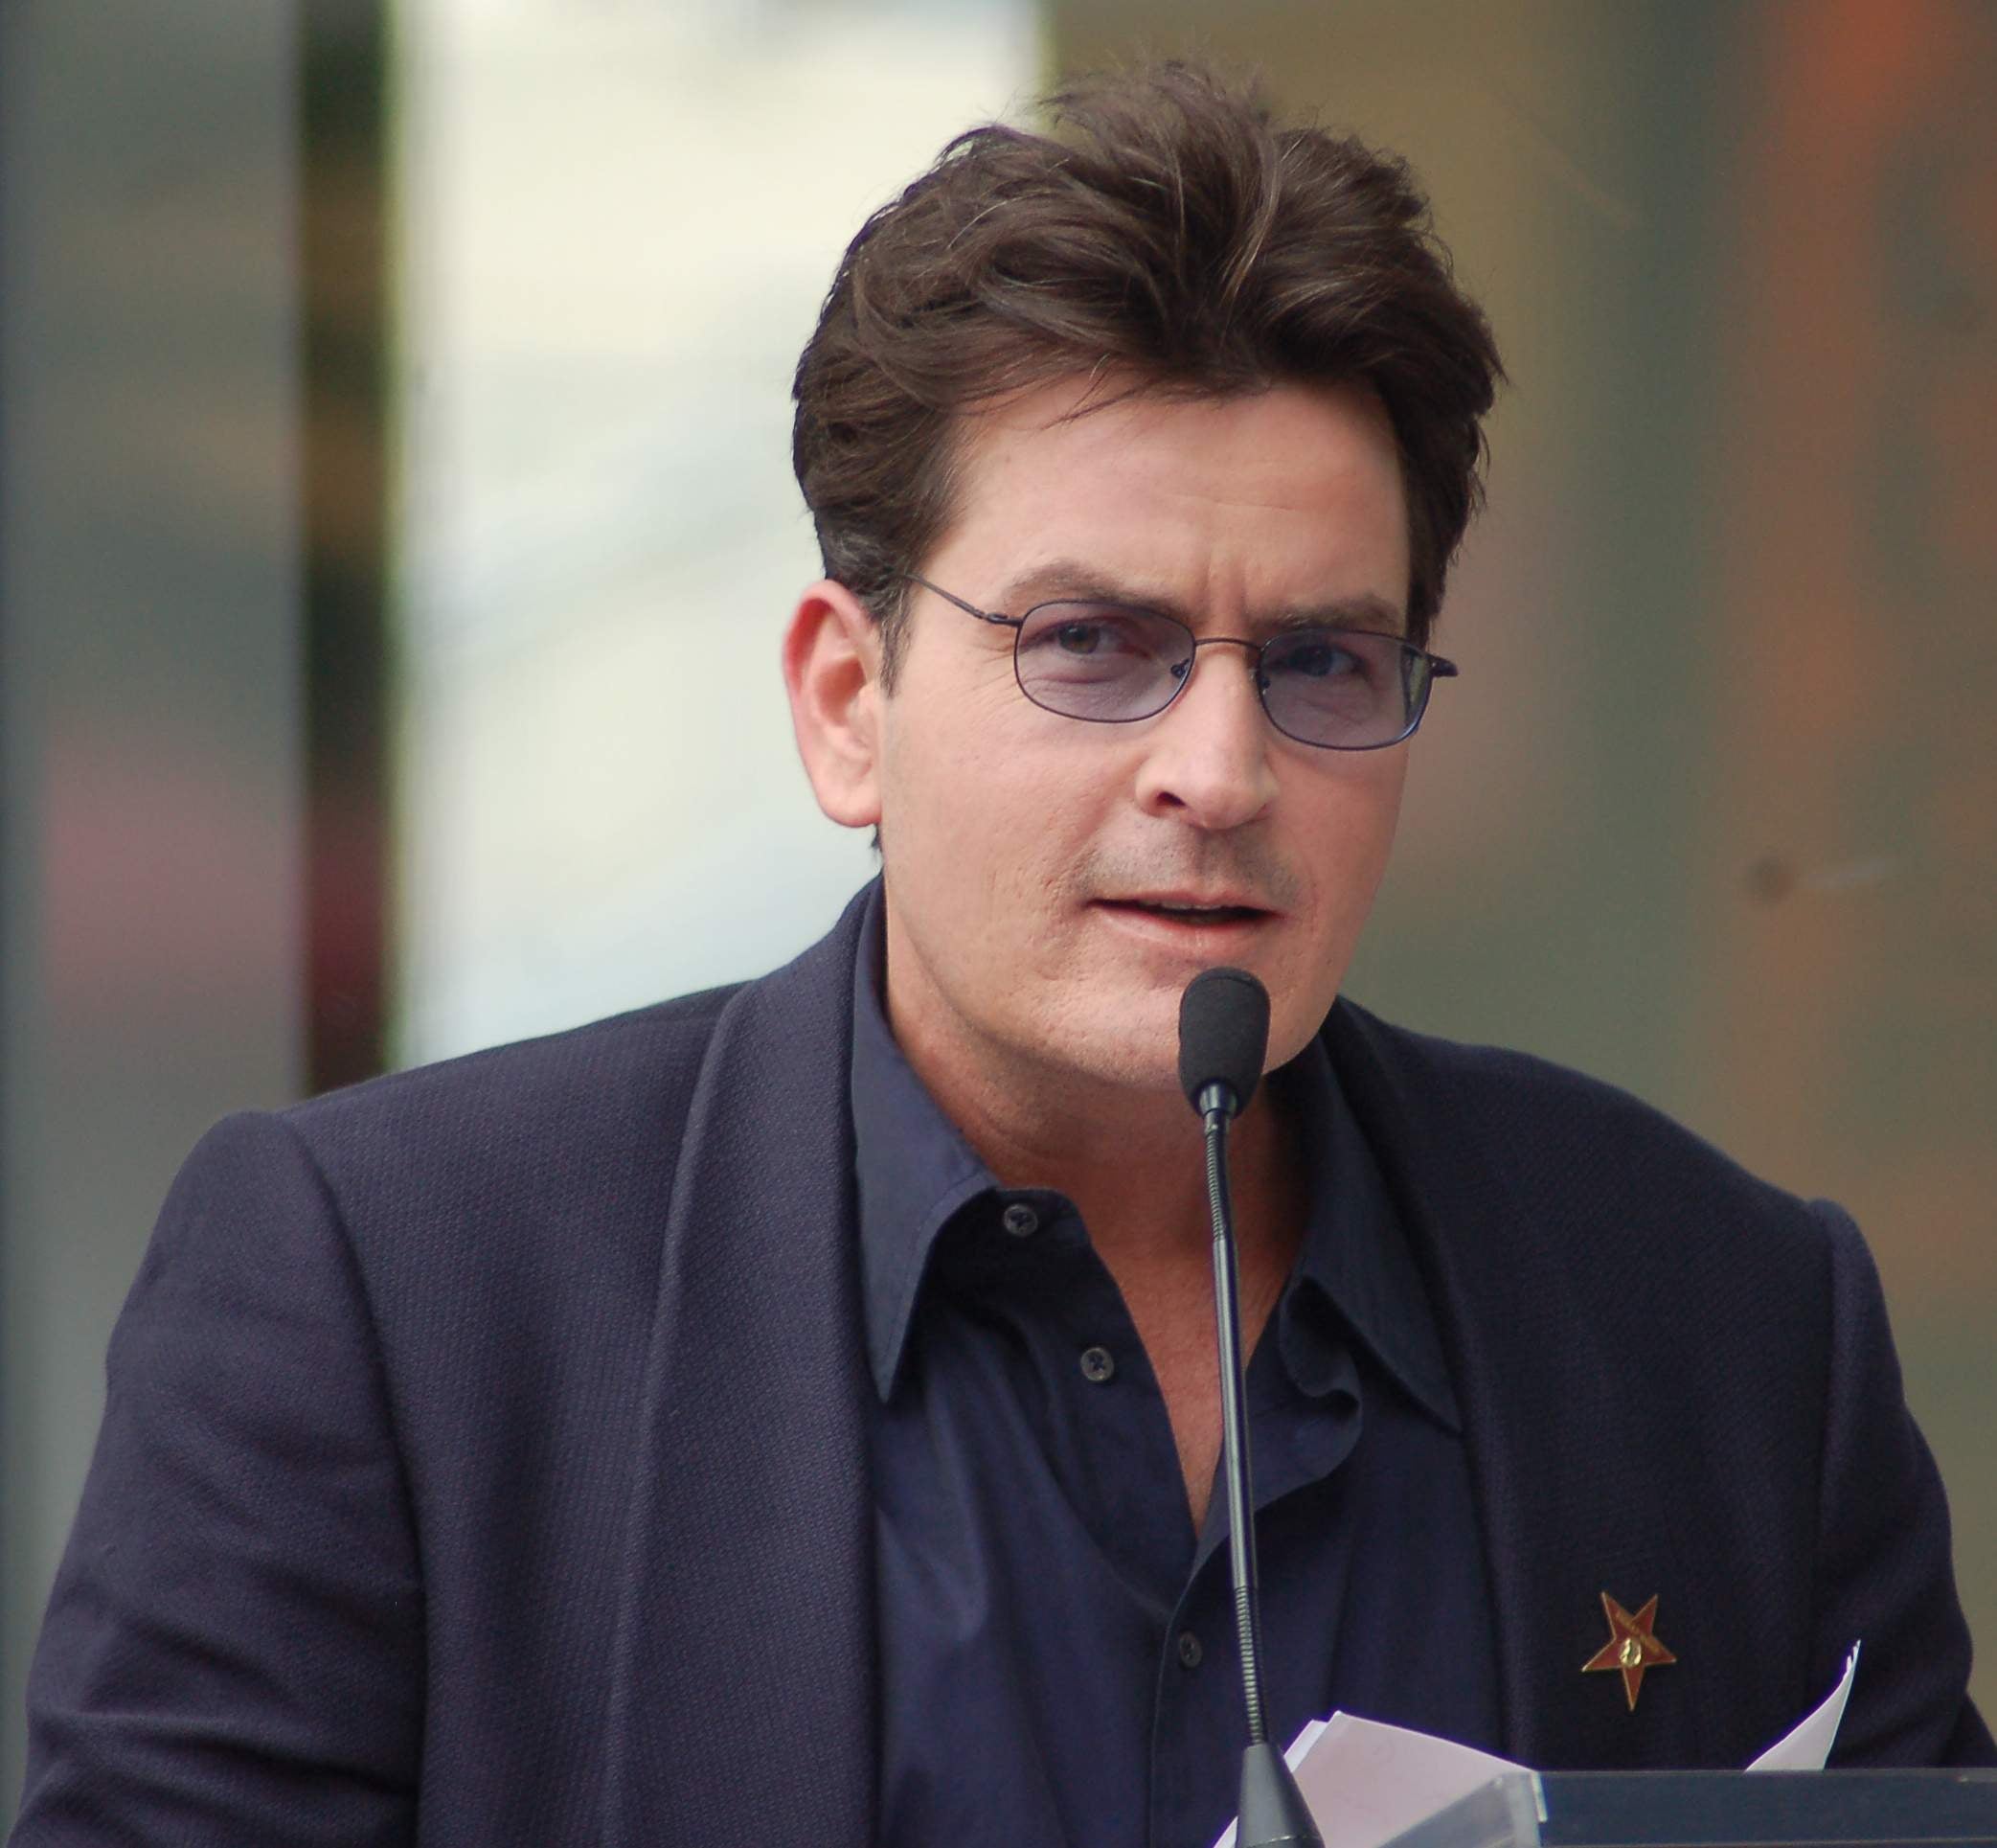 Charlie Sheen's Net Worth How Much is He Worth? Spear's Magazine